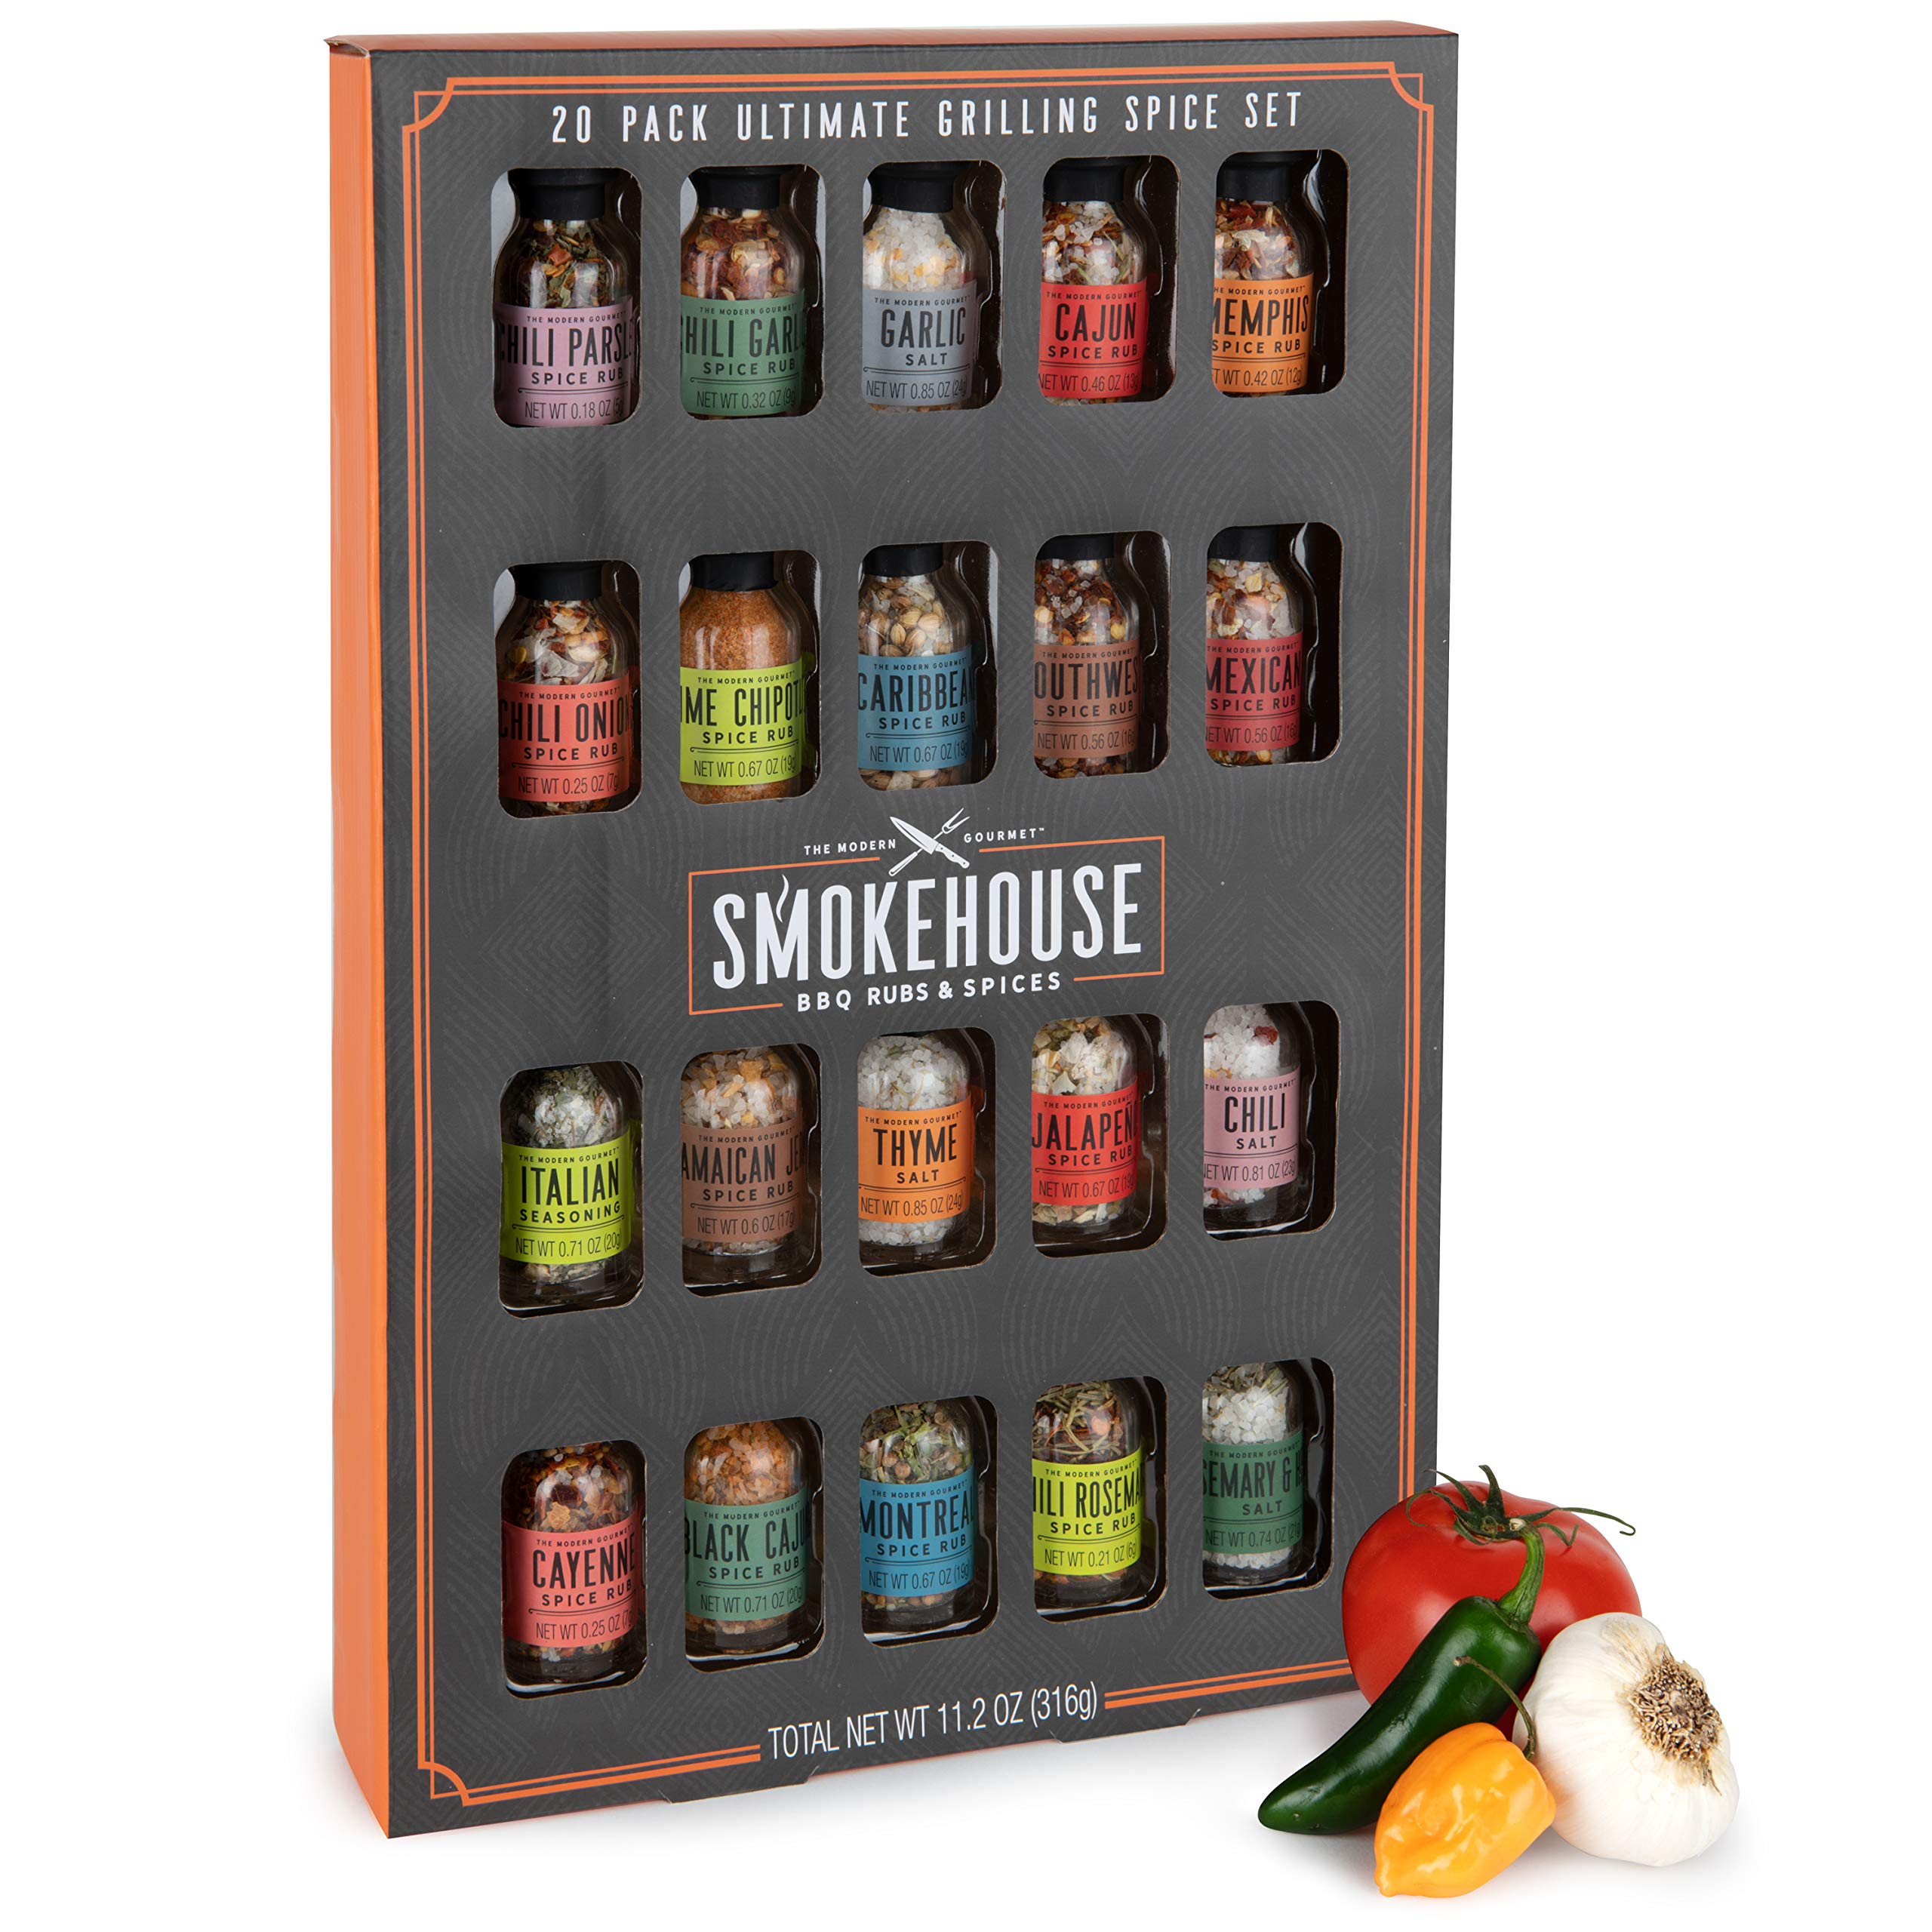 Smokehouse by Thoughtfully Ultimate Grilling Spice Set, Grill